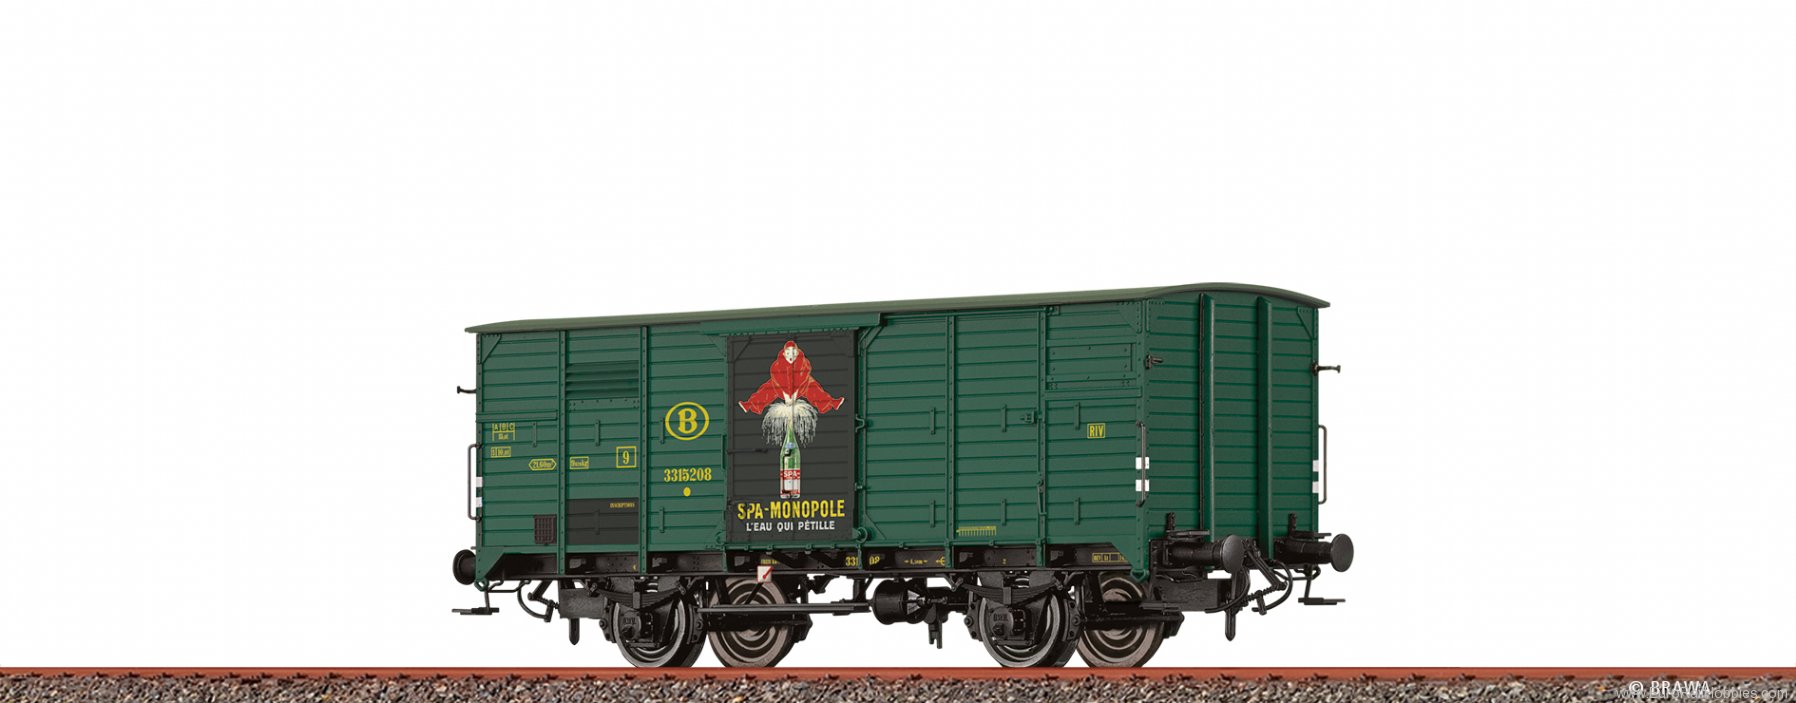 Brawa 50995 Covered Freight Car SPA Monopole SNCB